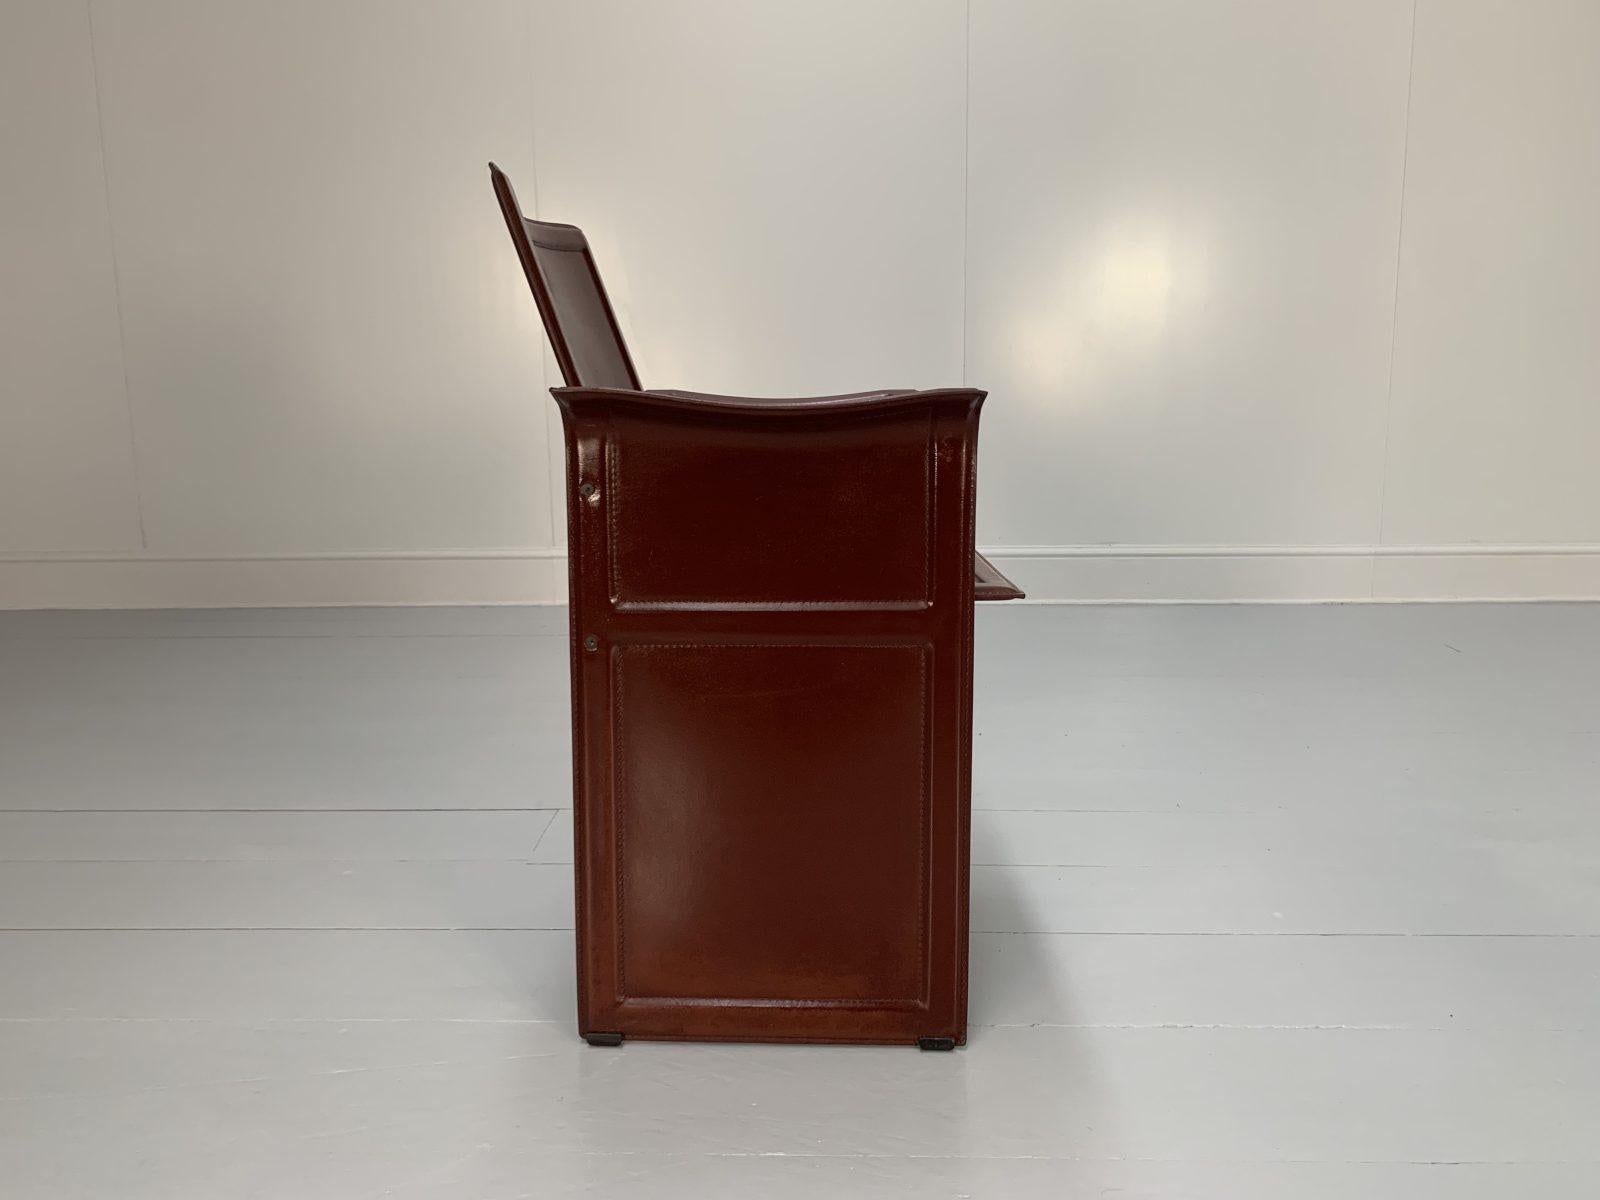 Contemporary 8 Matteo Grassi “Korium” Dining Chairs, in Brown Coach Leather For Sale